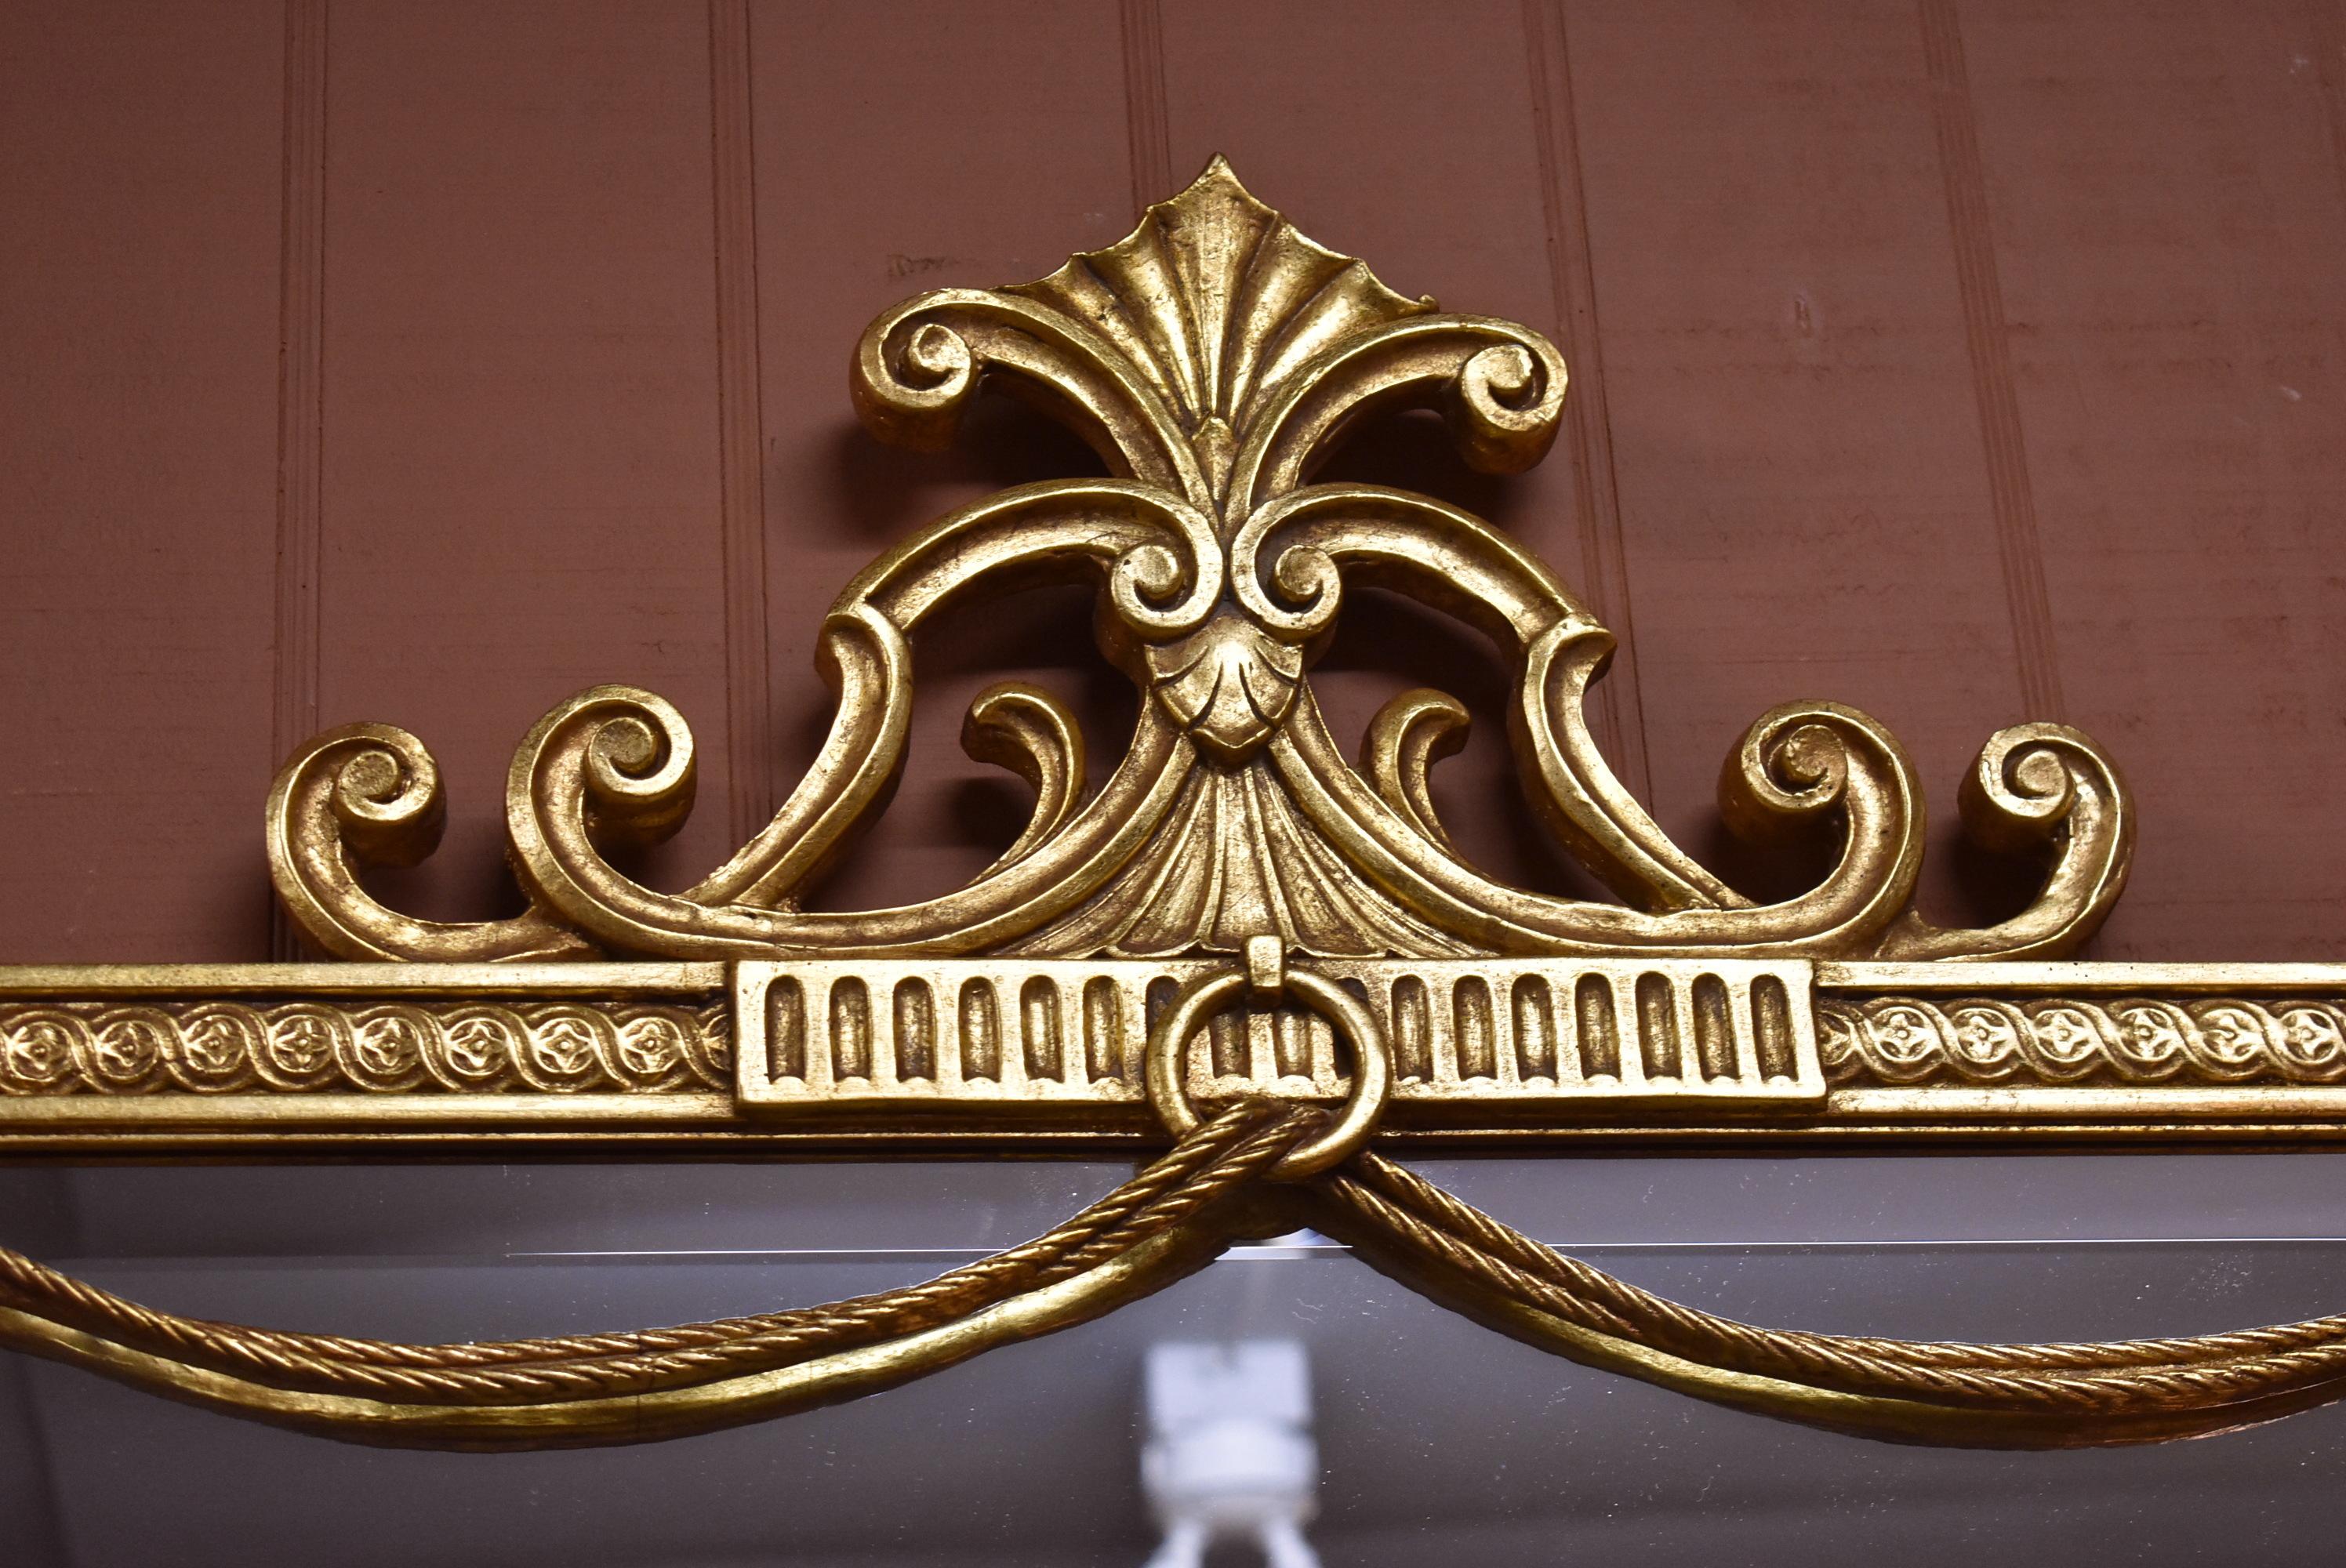 Friedman Brothers carved French style gilt beveled mirror. Two figural lion heads flank top corners. Tasseled rope swags across the top under carved center plume pediment.